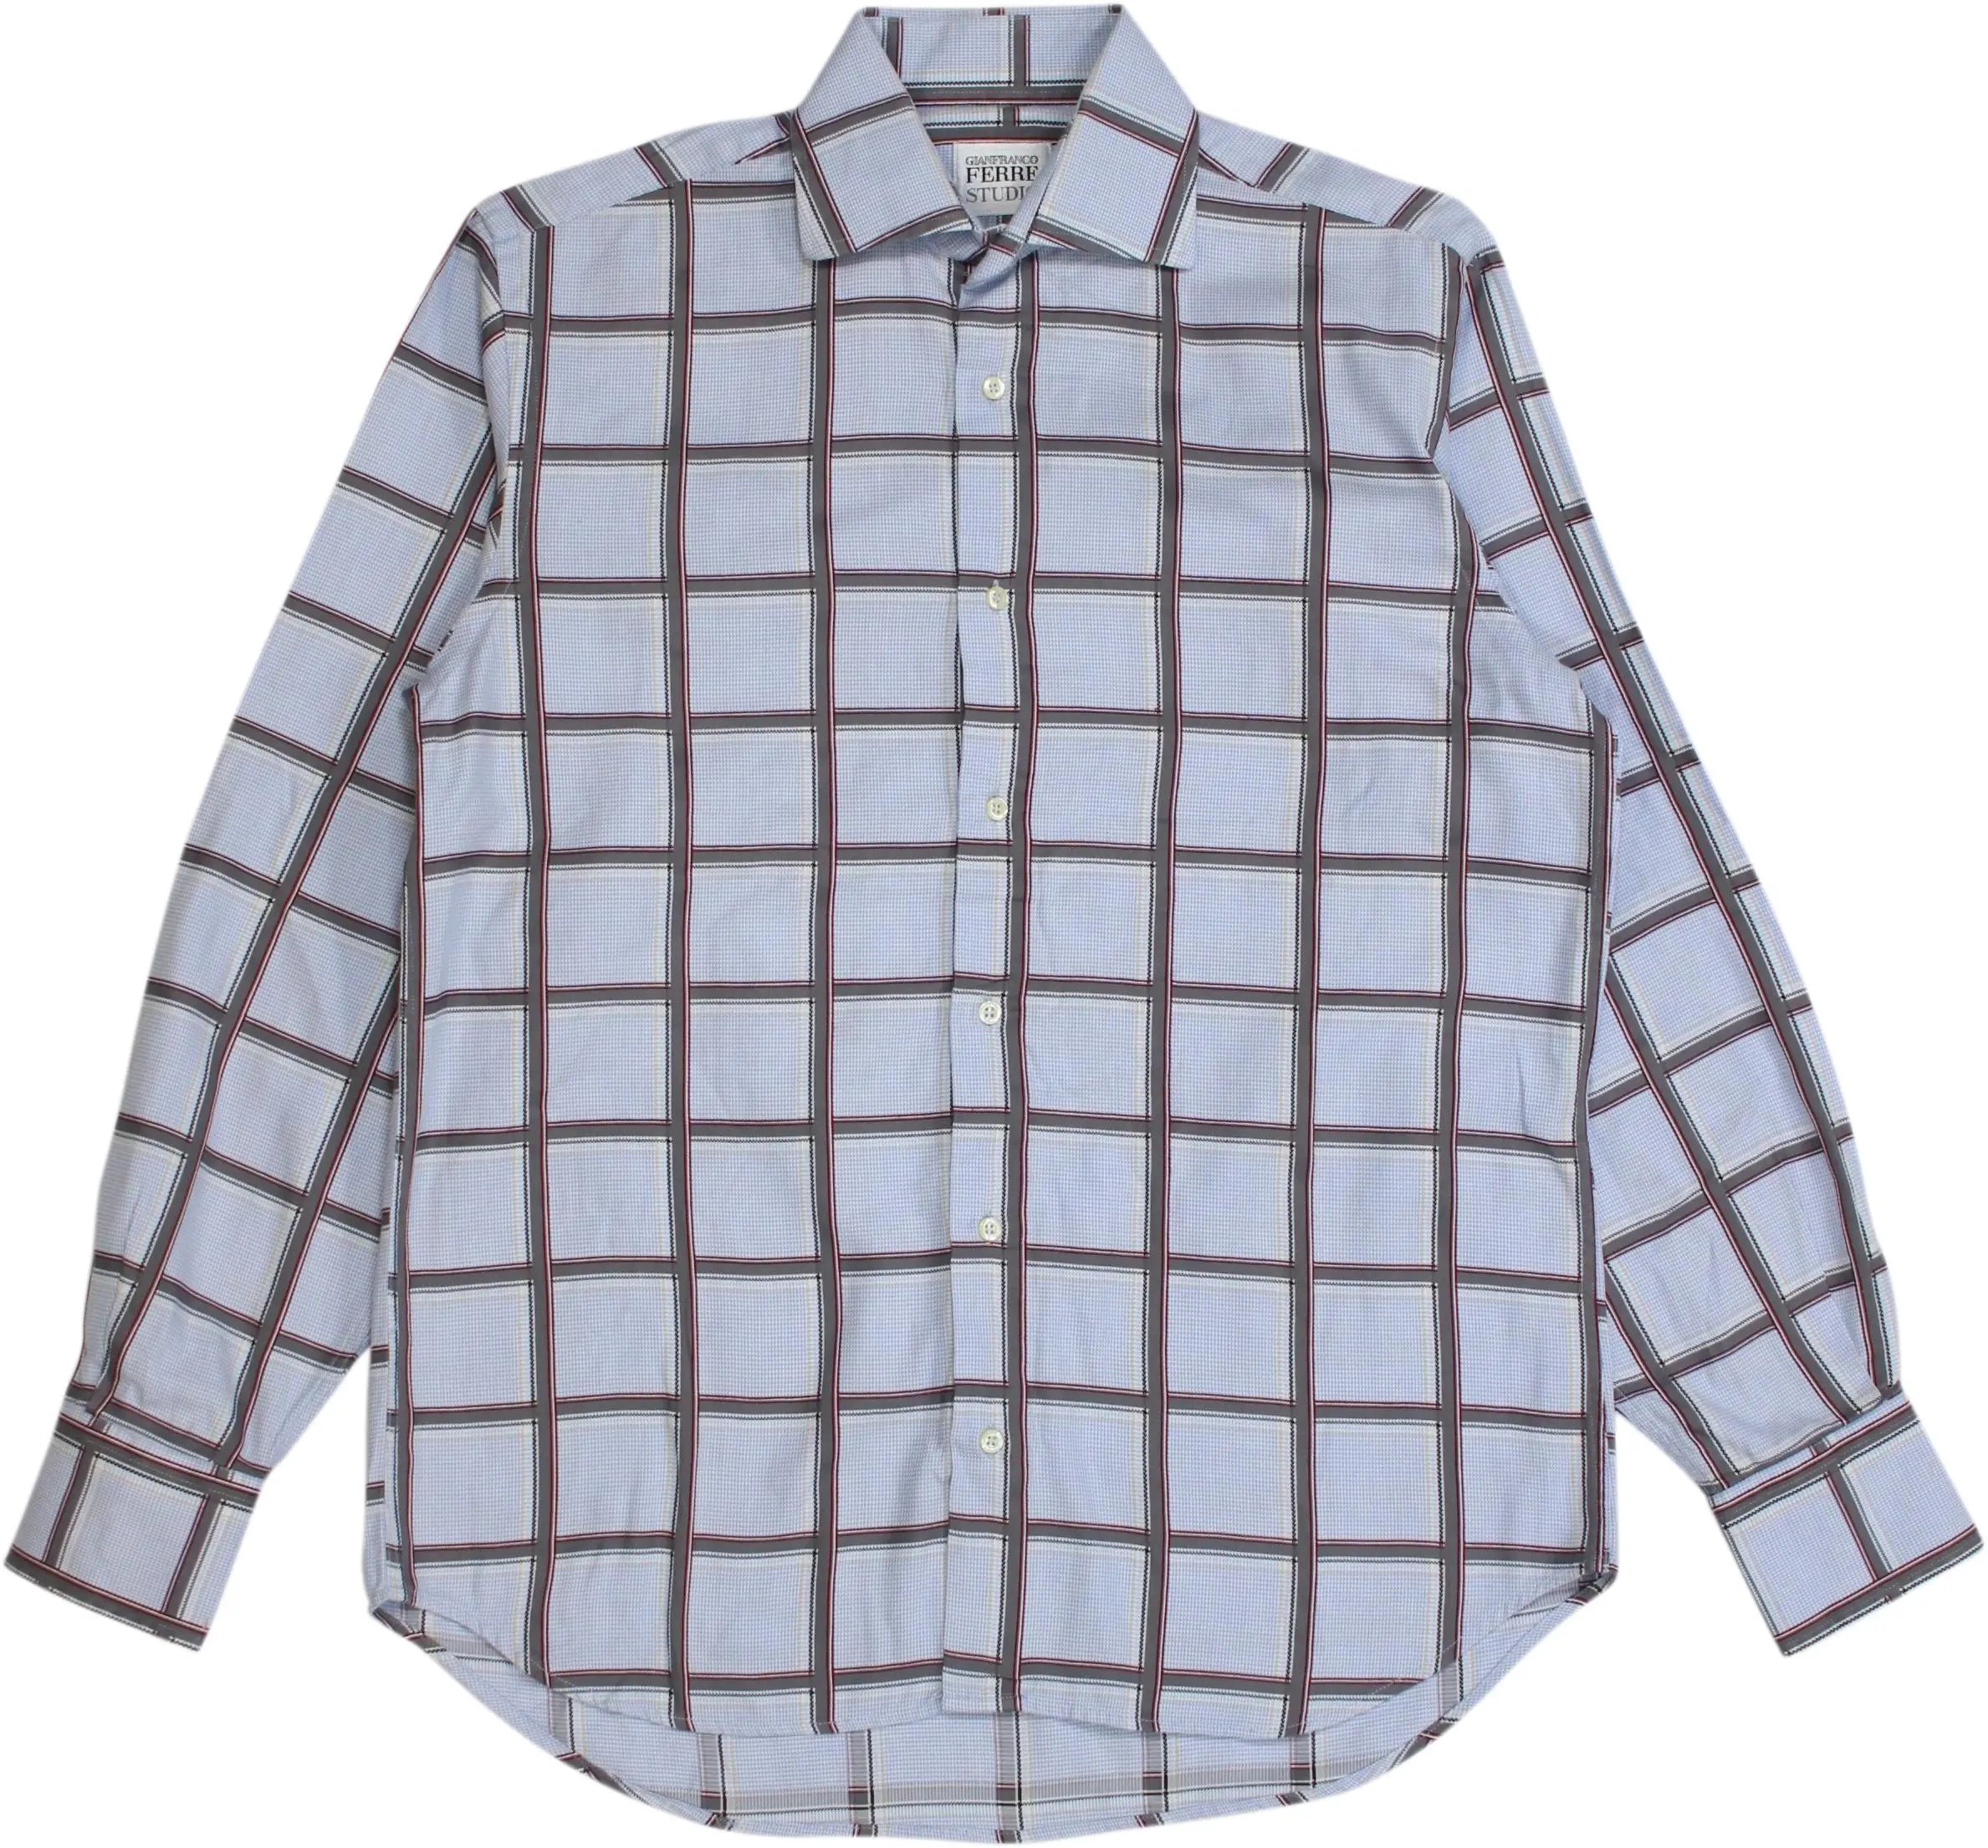 Gianfranco Ferre - Checked Shirt by Gianfranco Ferré- ThriftTale.com - Vintage and second handclothing